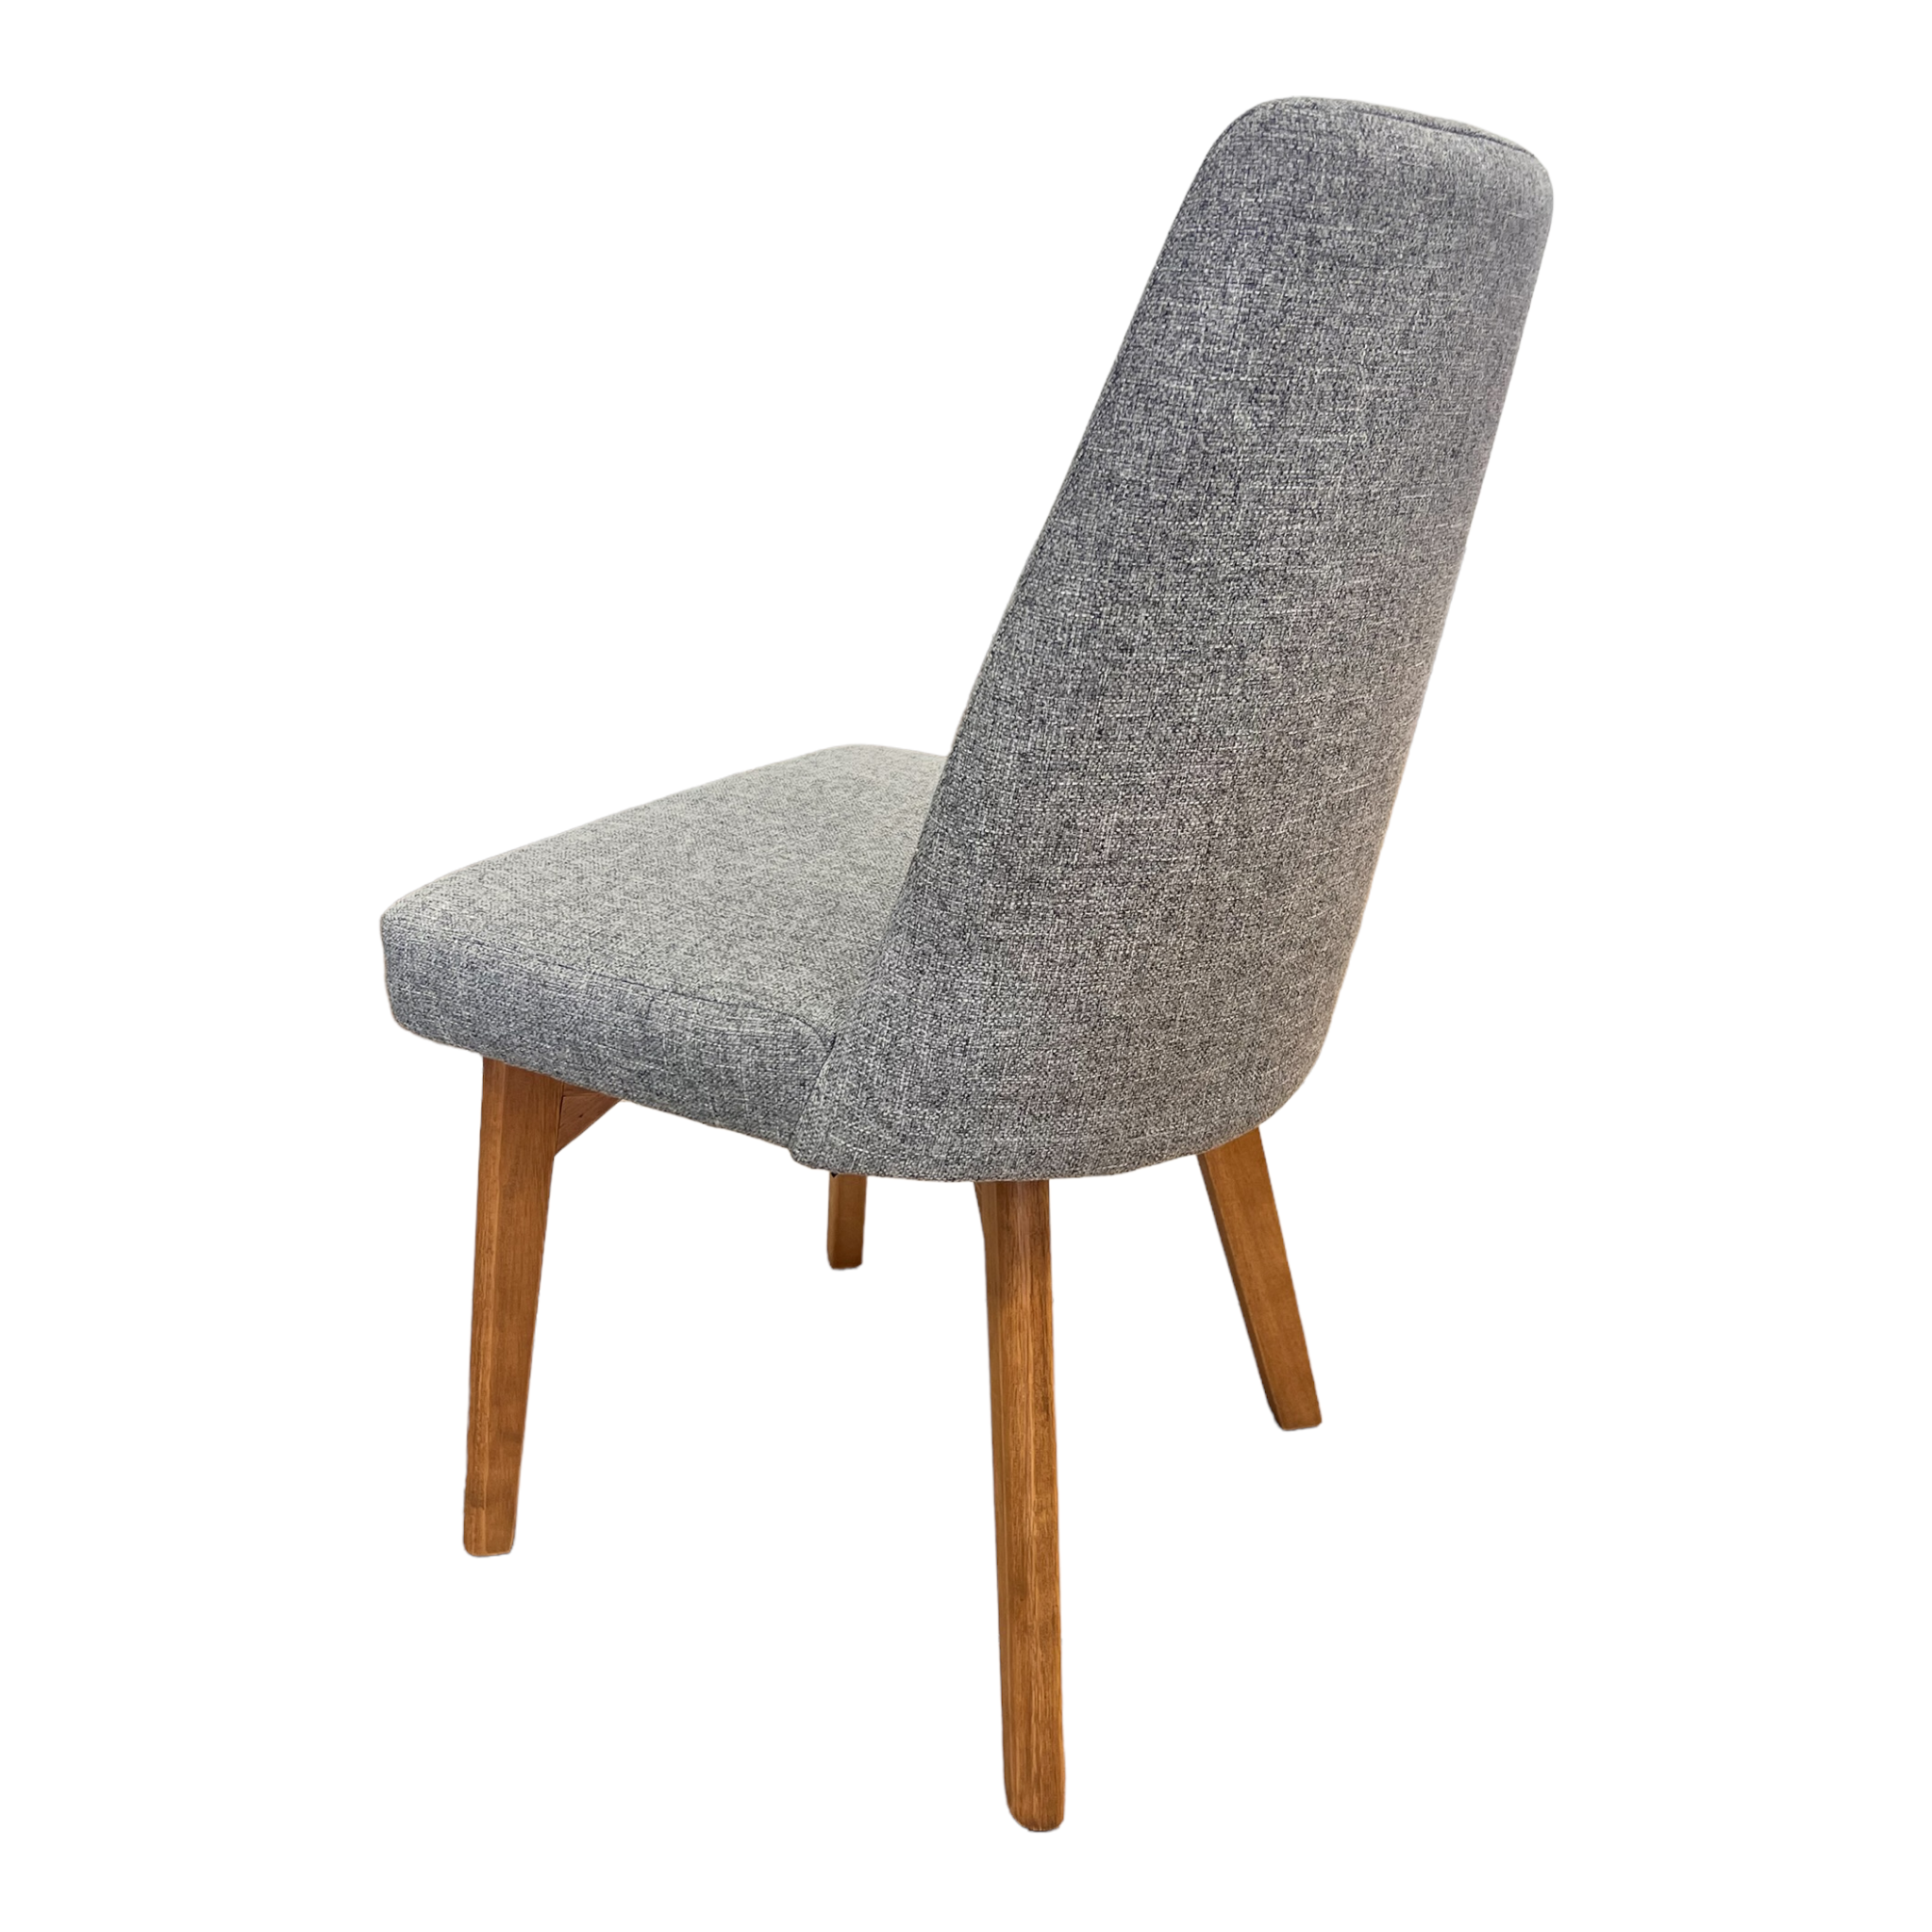 Crystalbrook Dining Chair